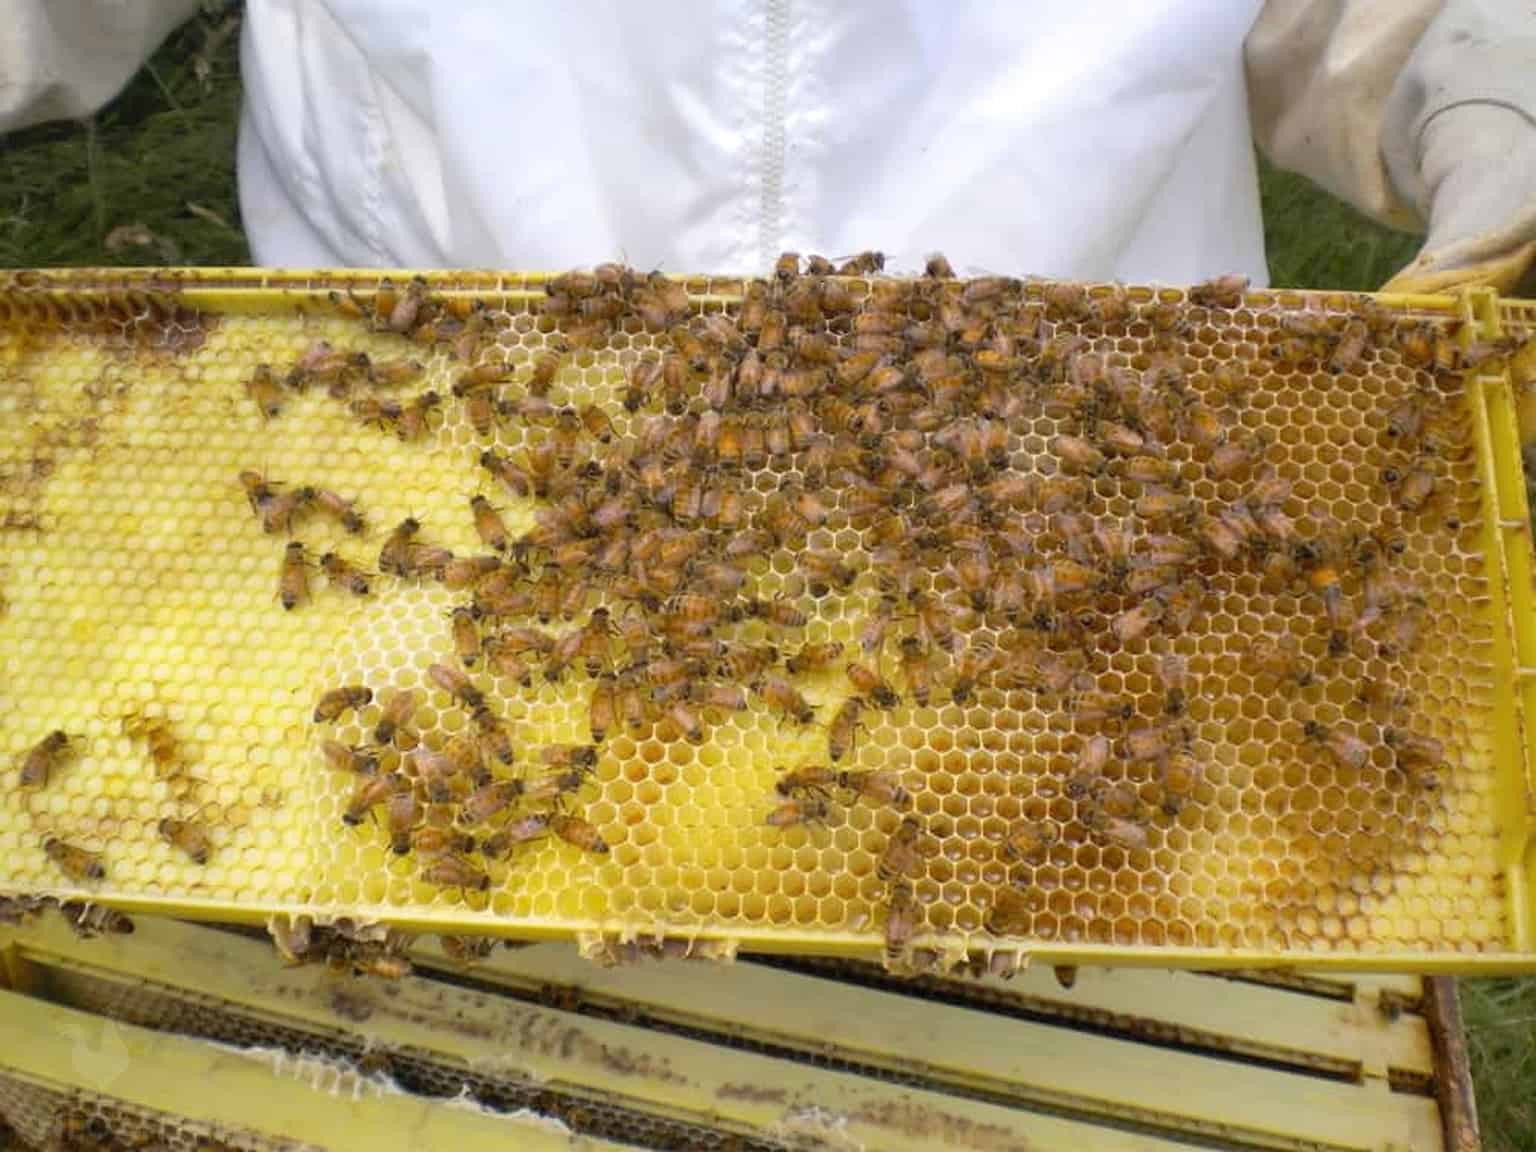 holding a super with honey and bees